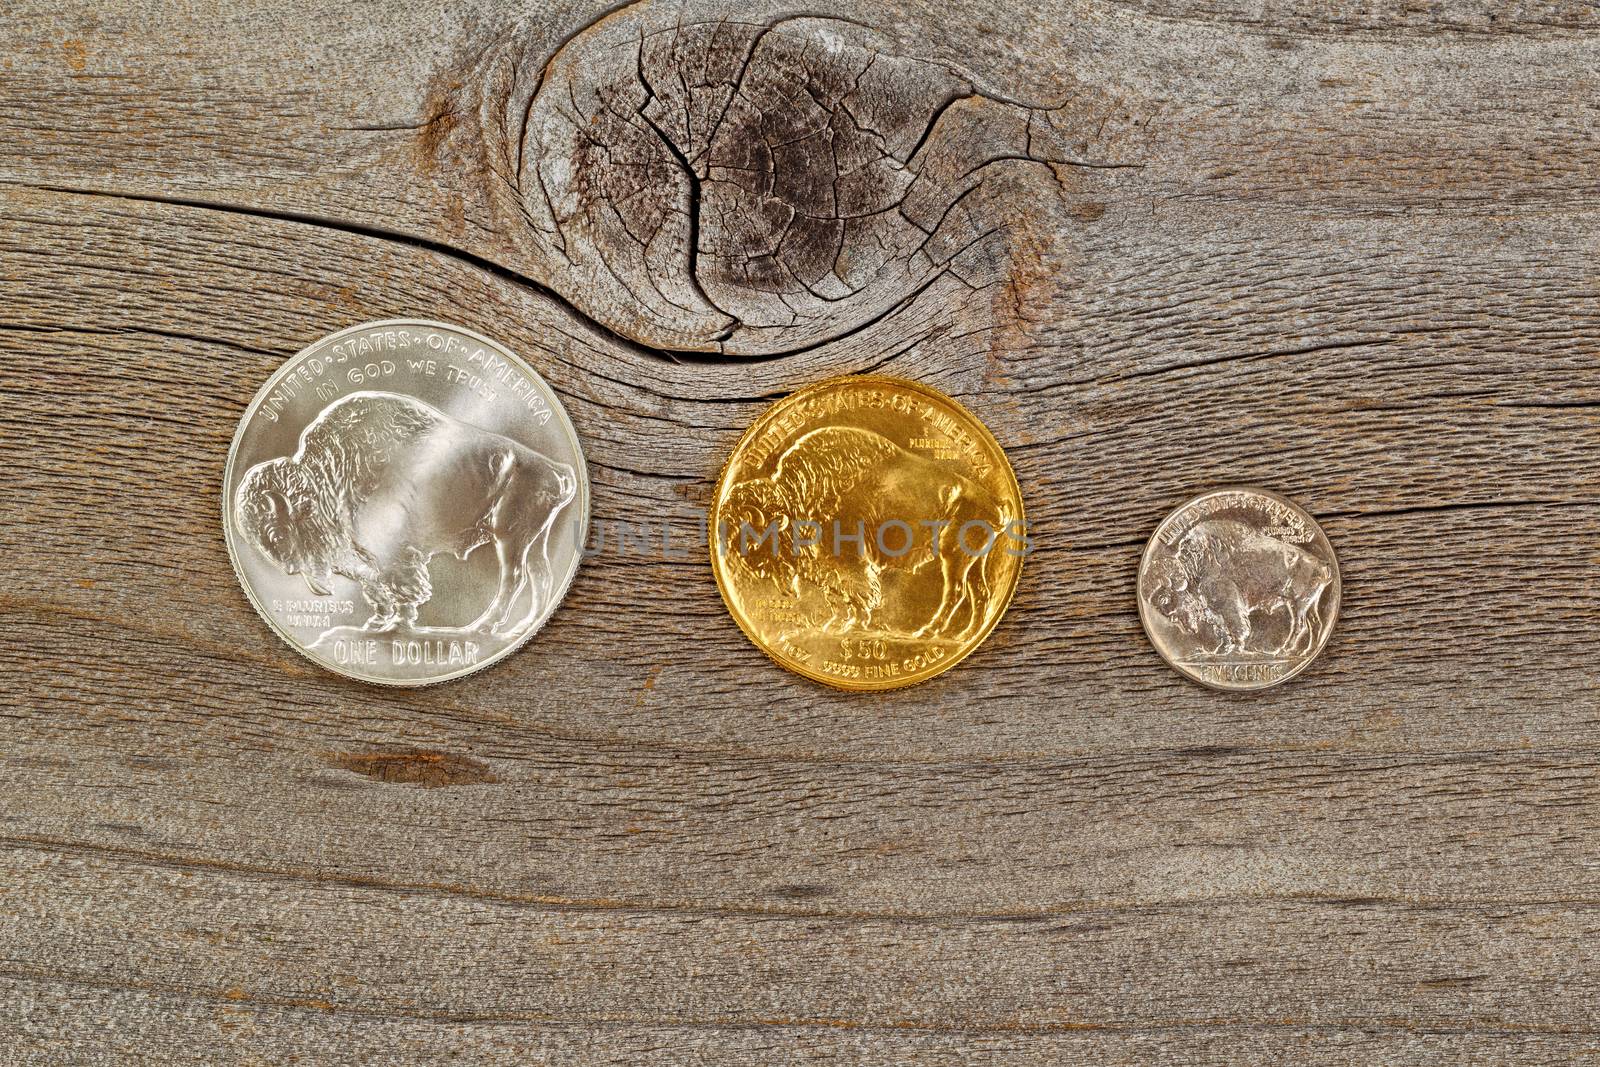 American Buffalo Coins on rustic wooden background by tab1962